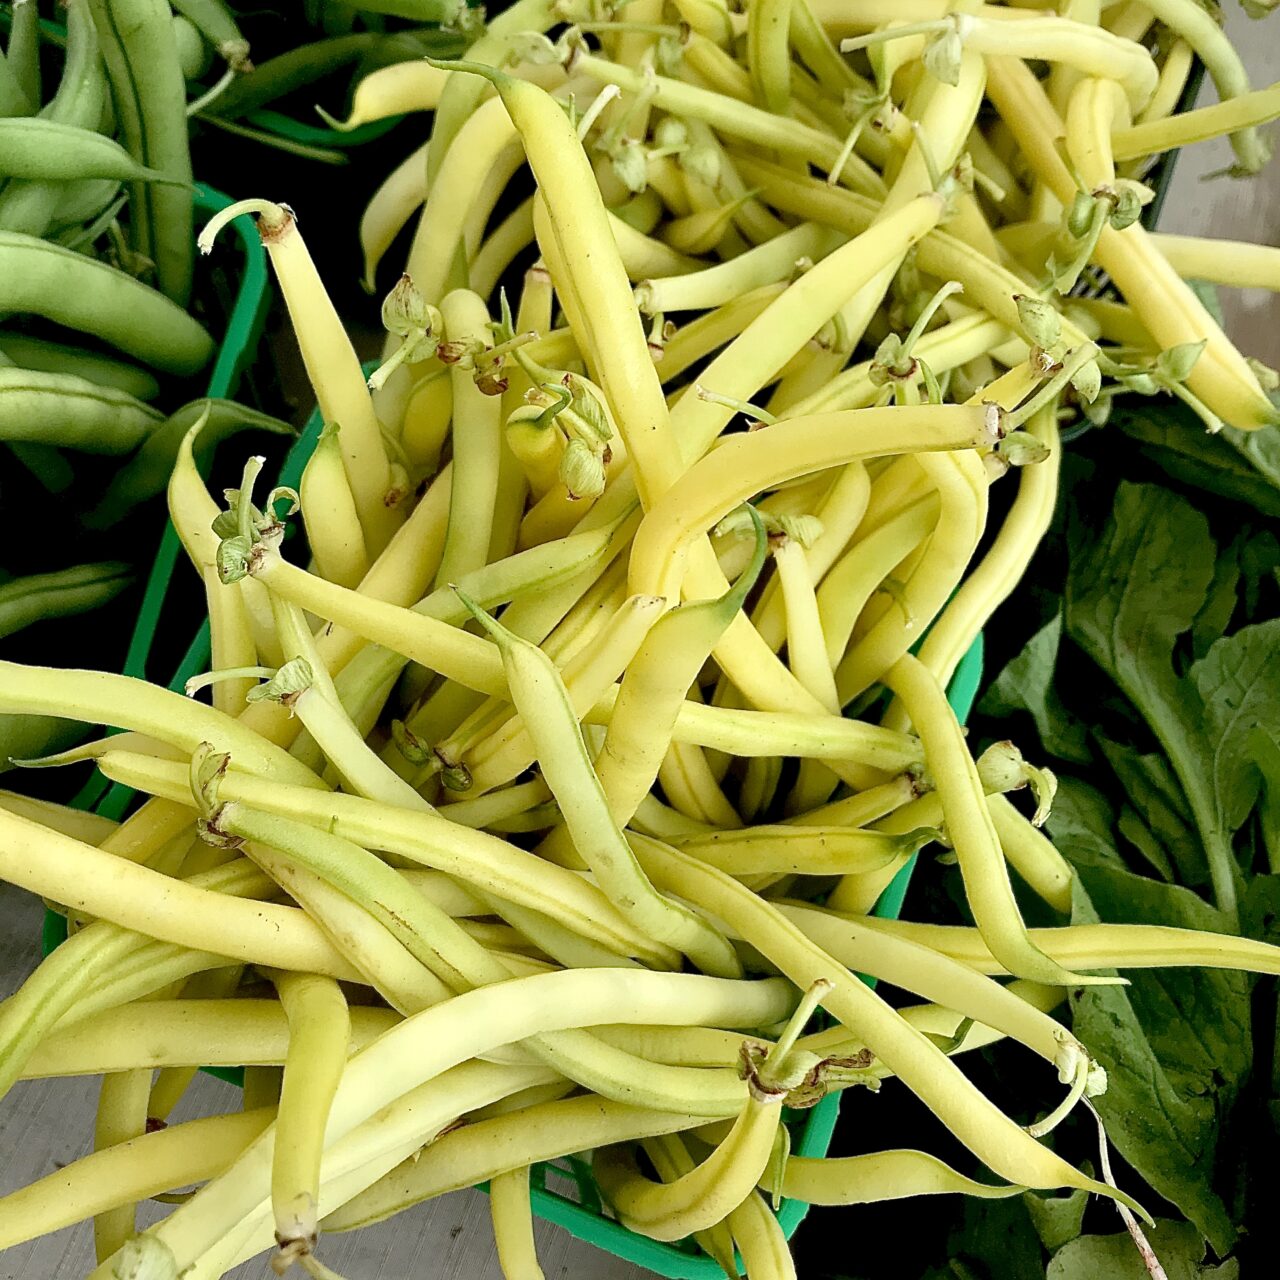 Yellow beans overflowing out of baskets